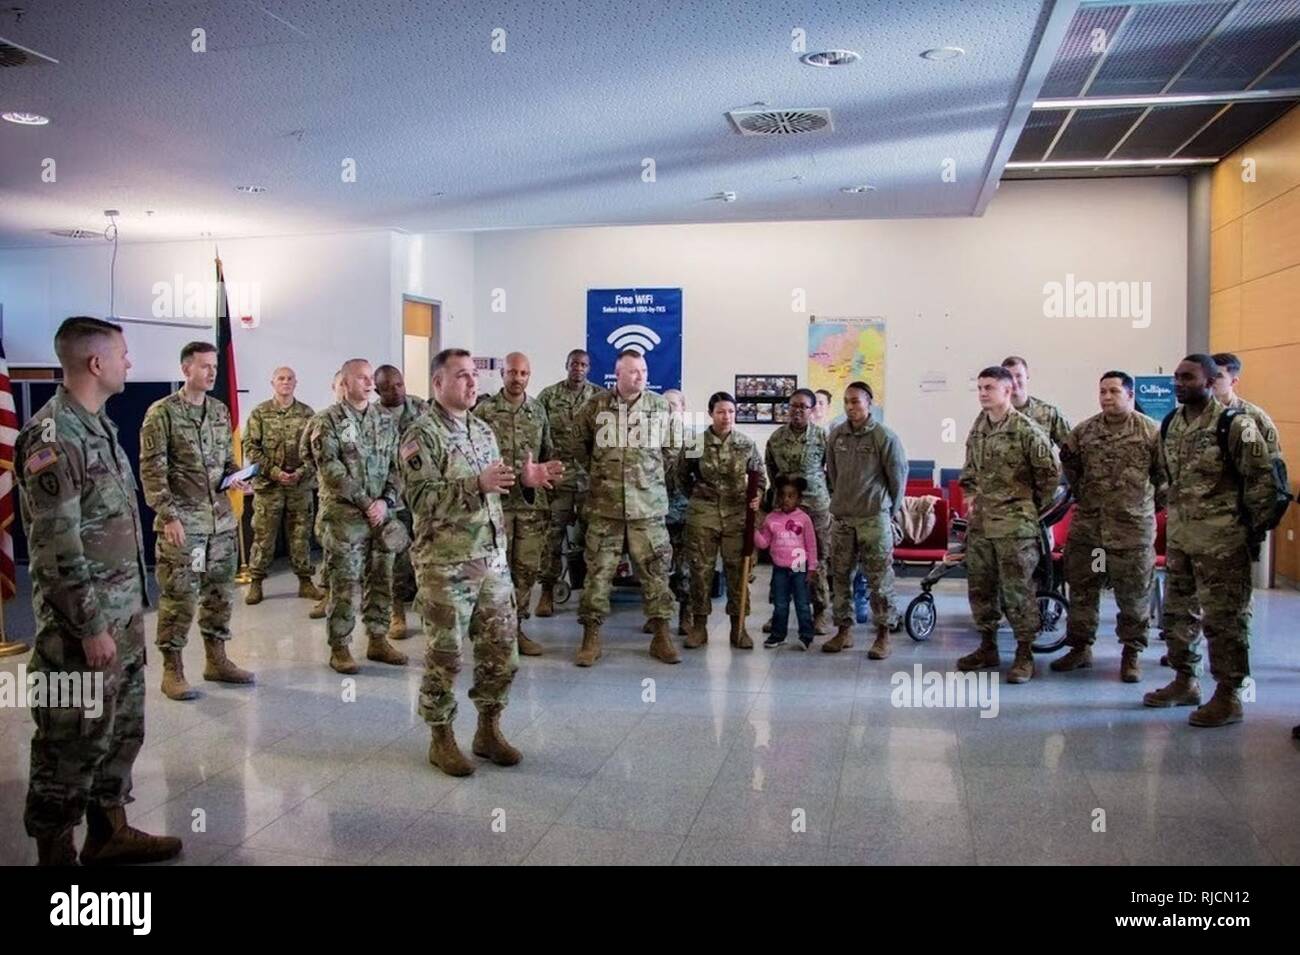 Col. Timothy Bosetti, 30th Medical Brigade commander, welcomes Soldiers of the 254th Medical Detachment back from the unit's 9-month deployment to Central Command area of responsibility, Jan. 11 at Ramstein Air Base in Kaiserslautern, Germany. Stock Photo